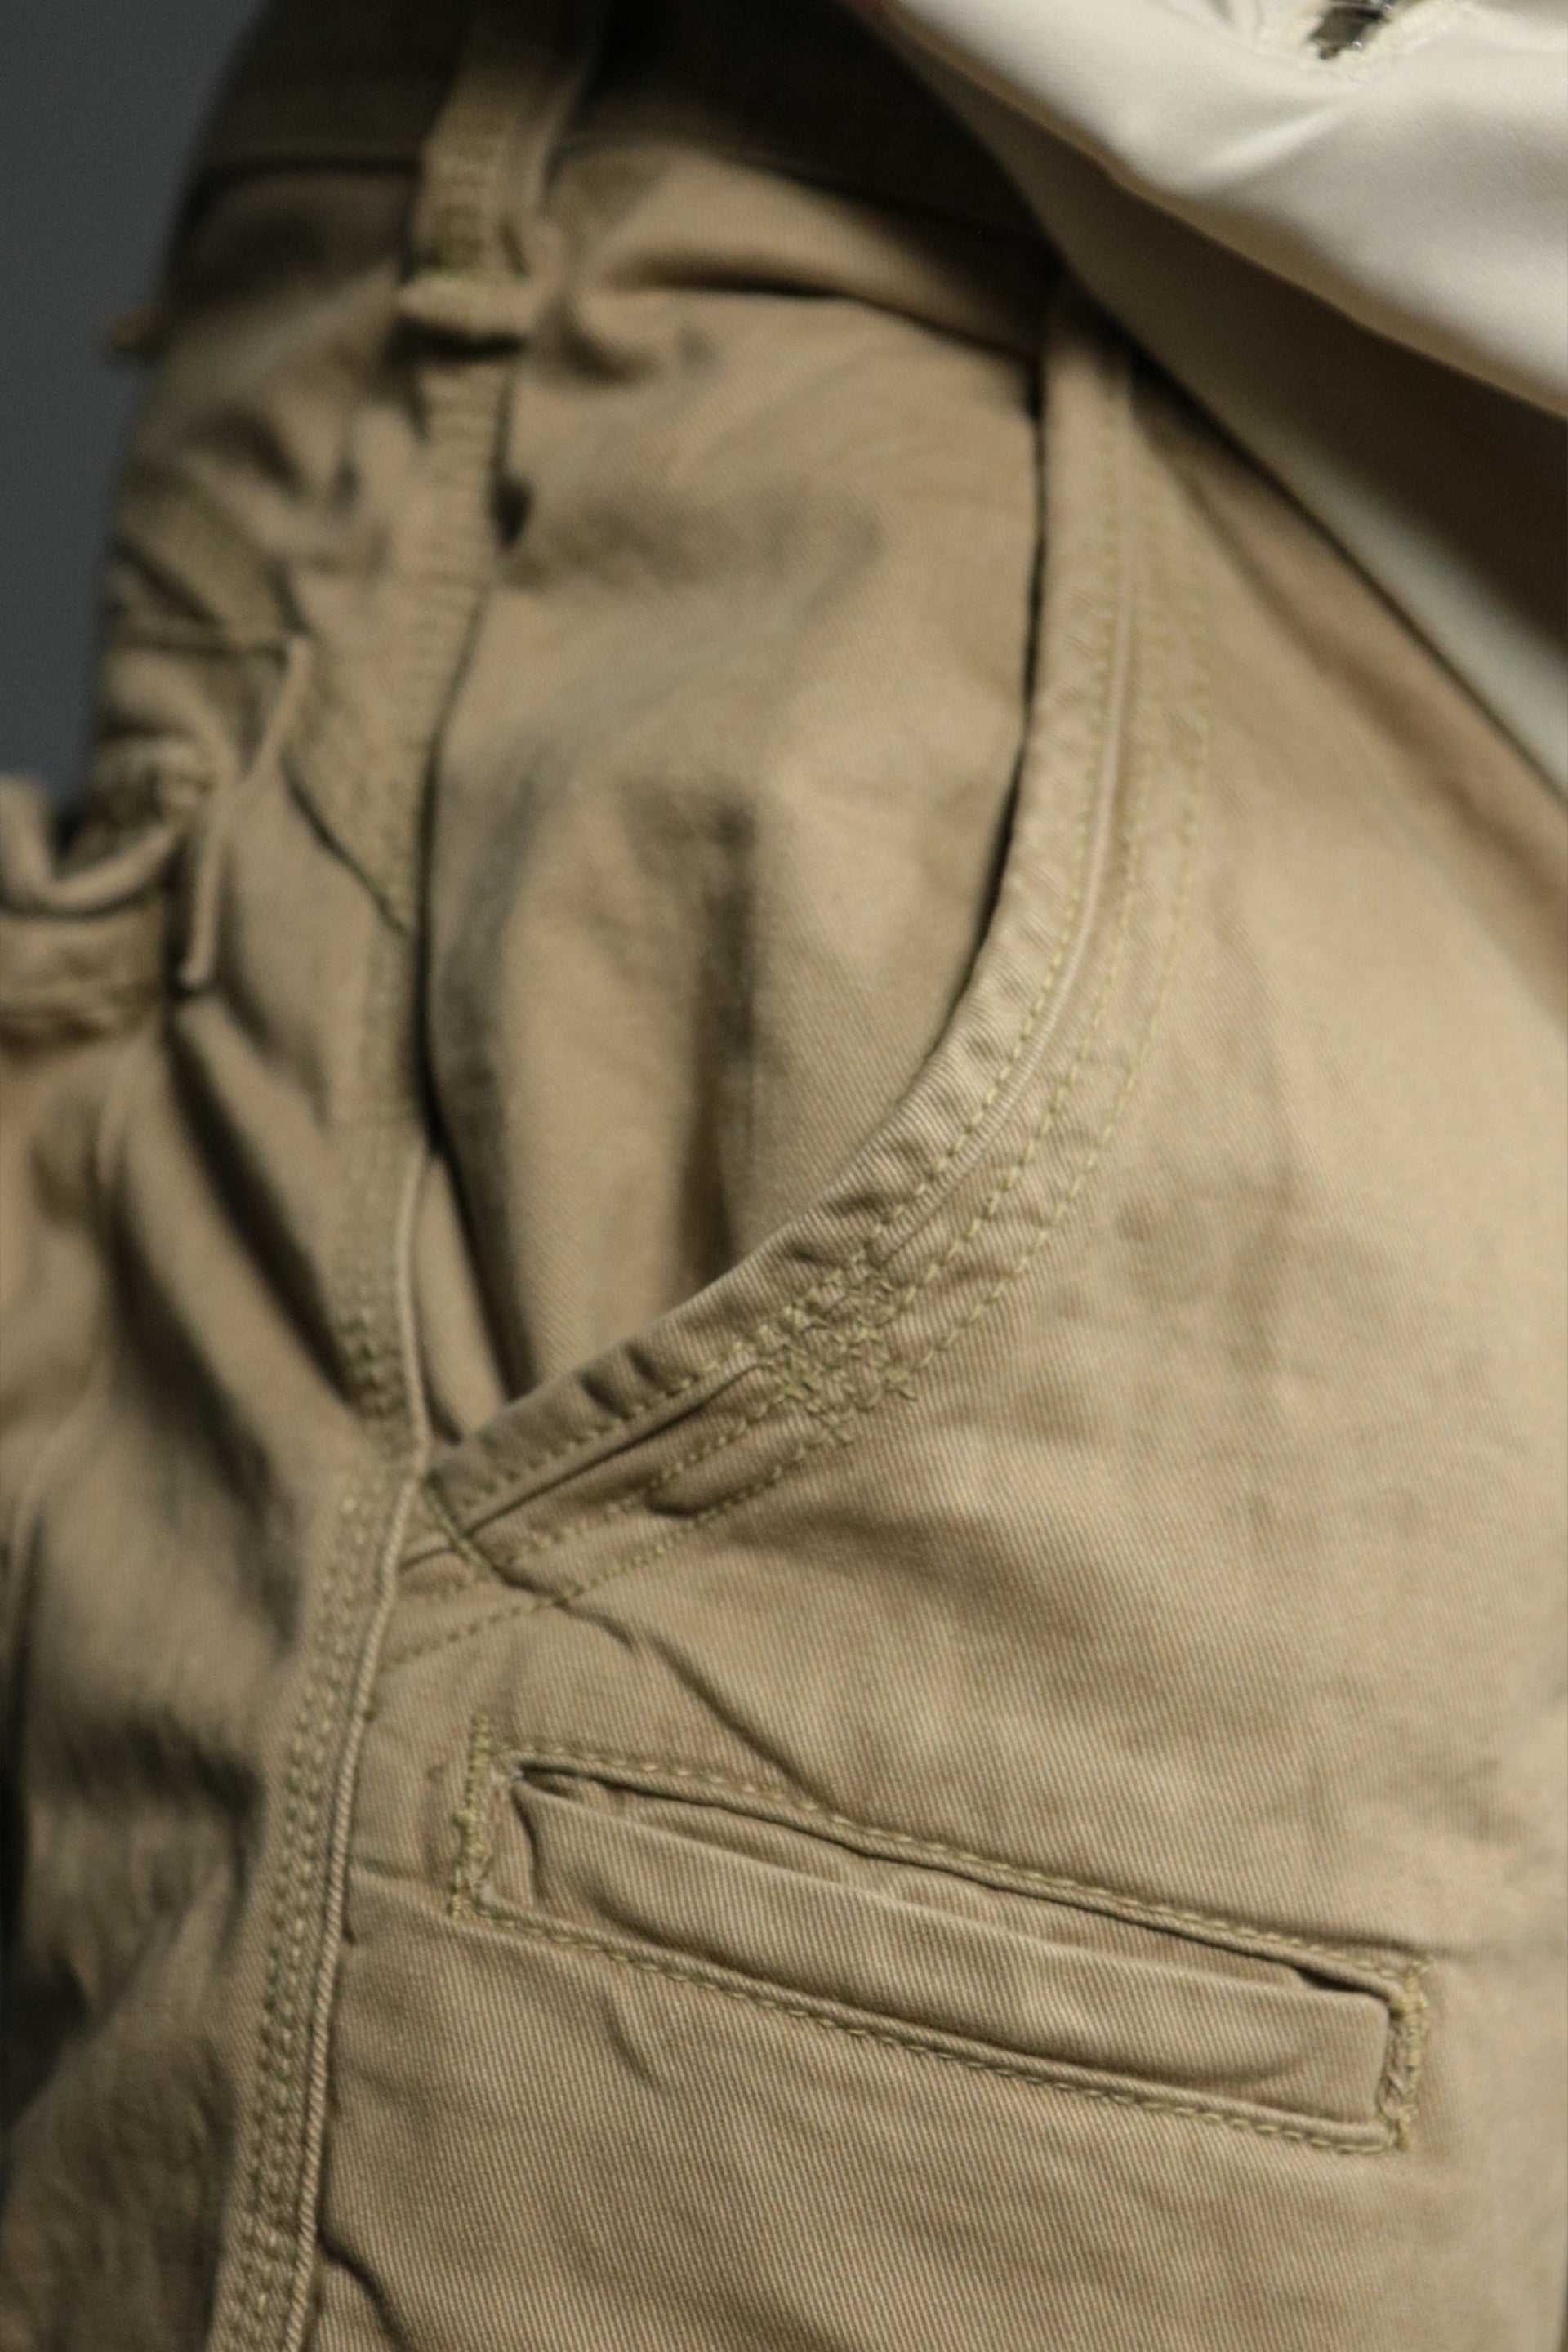 One of the two front pockets of the khaki streetwear cargo pants for men.